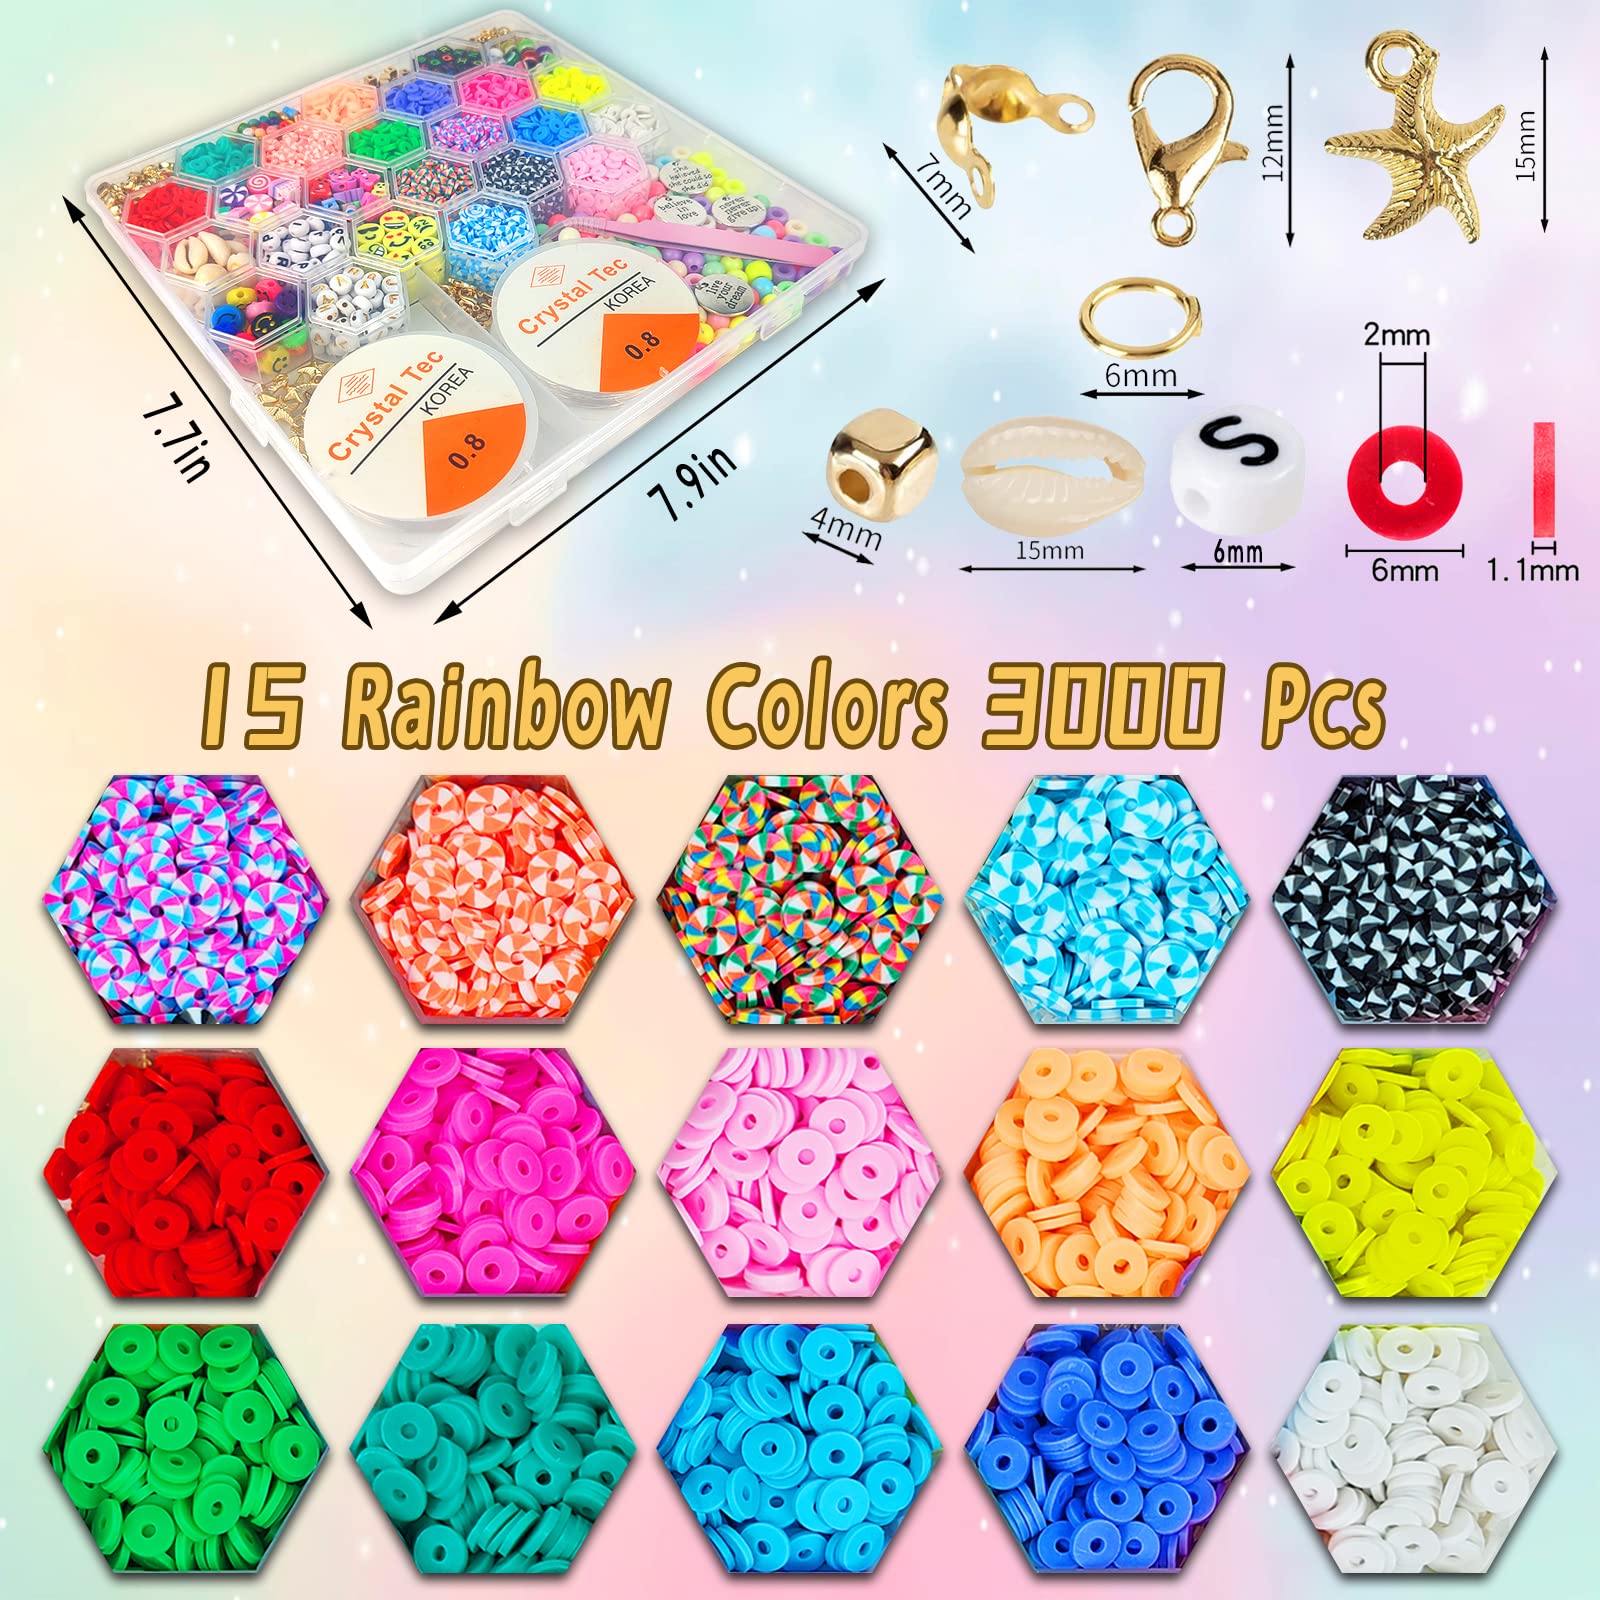 Acrylic Letter Beads 1800pcs 4mm X 7mm Round Letter Beads For Jewelry  Making Bracelets Necklaces Key Chains